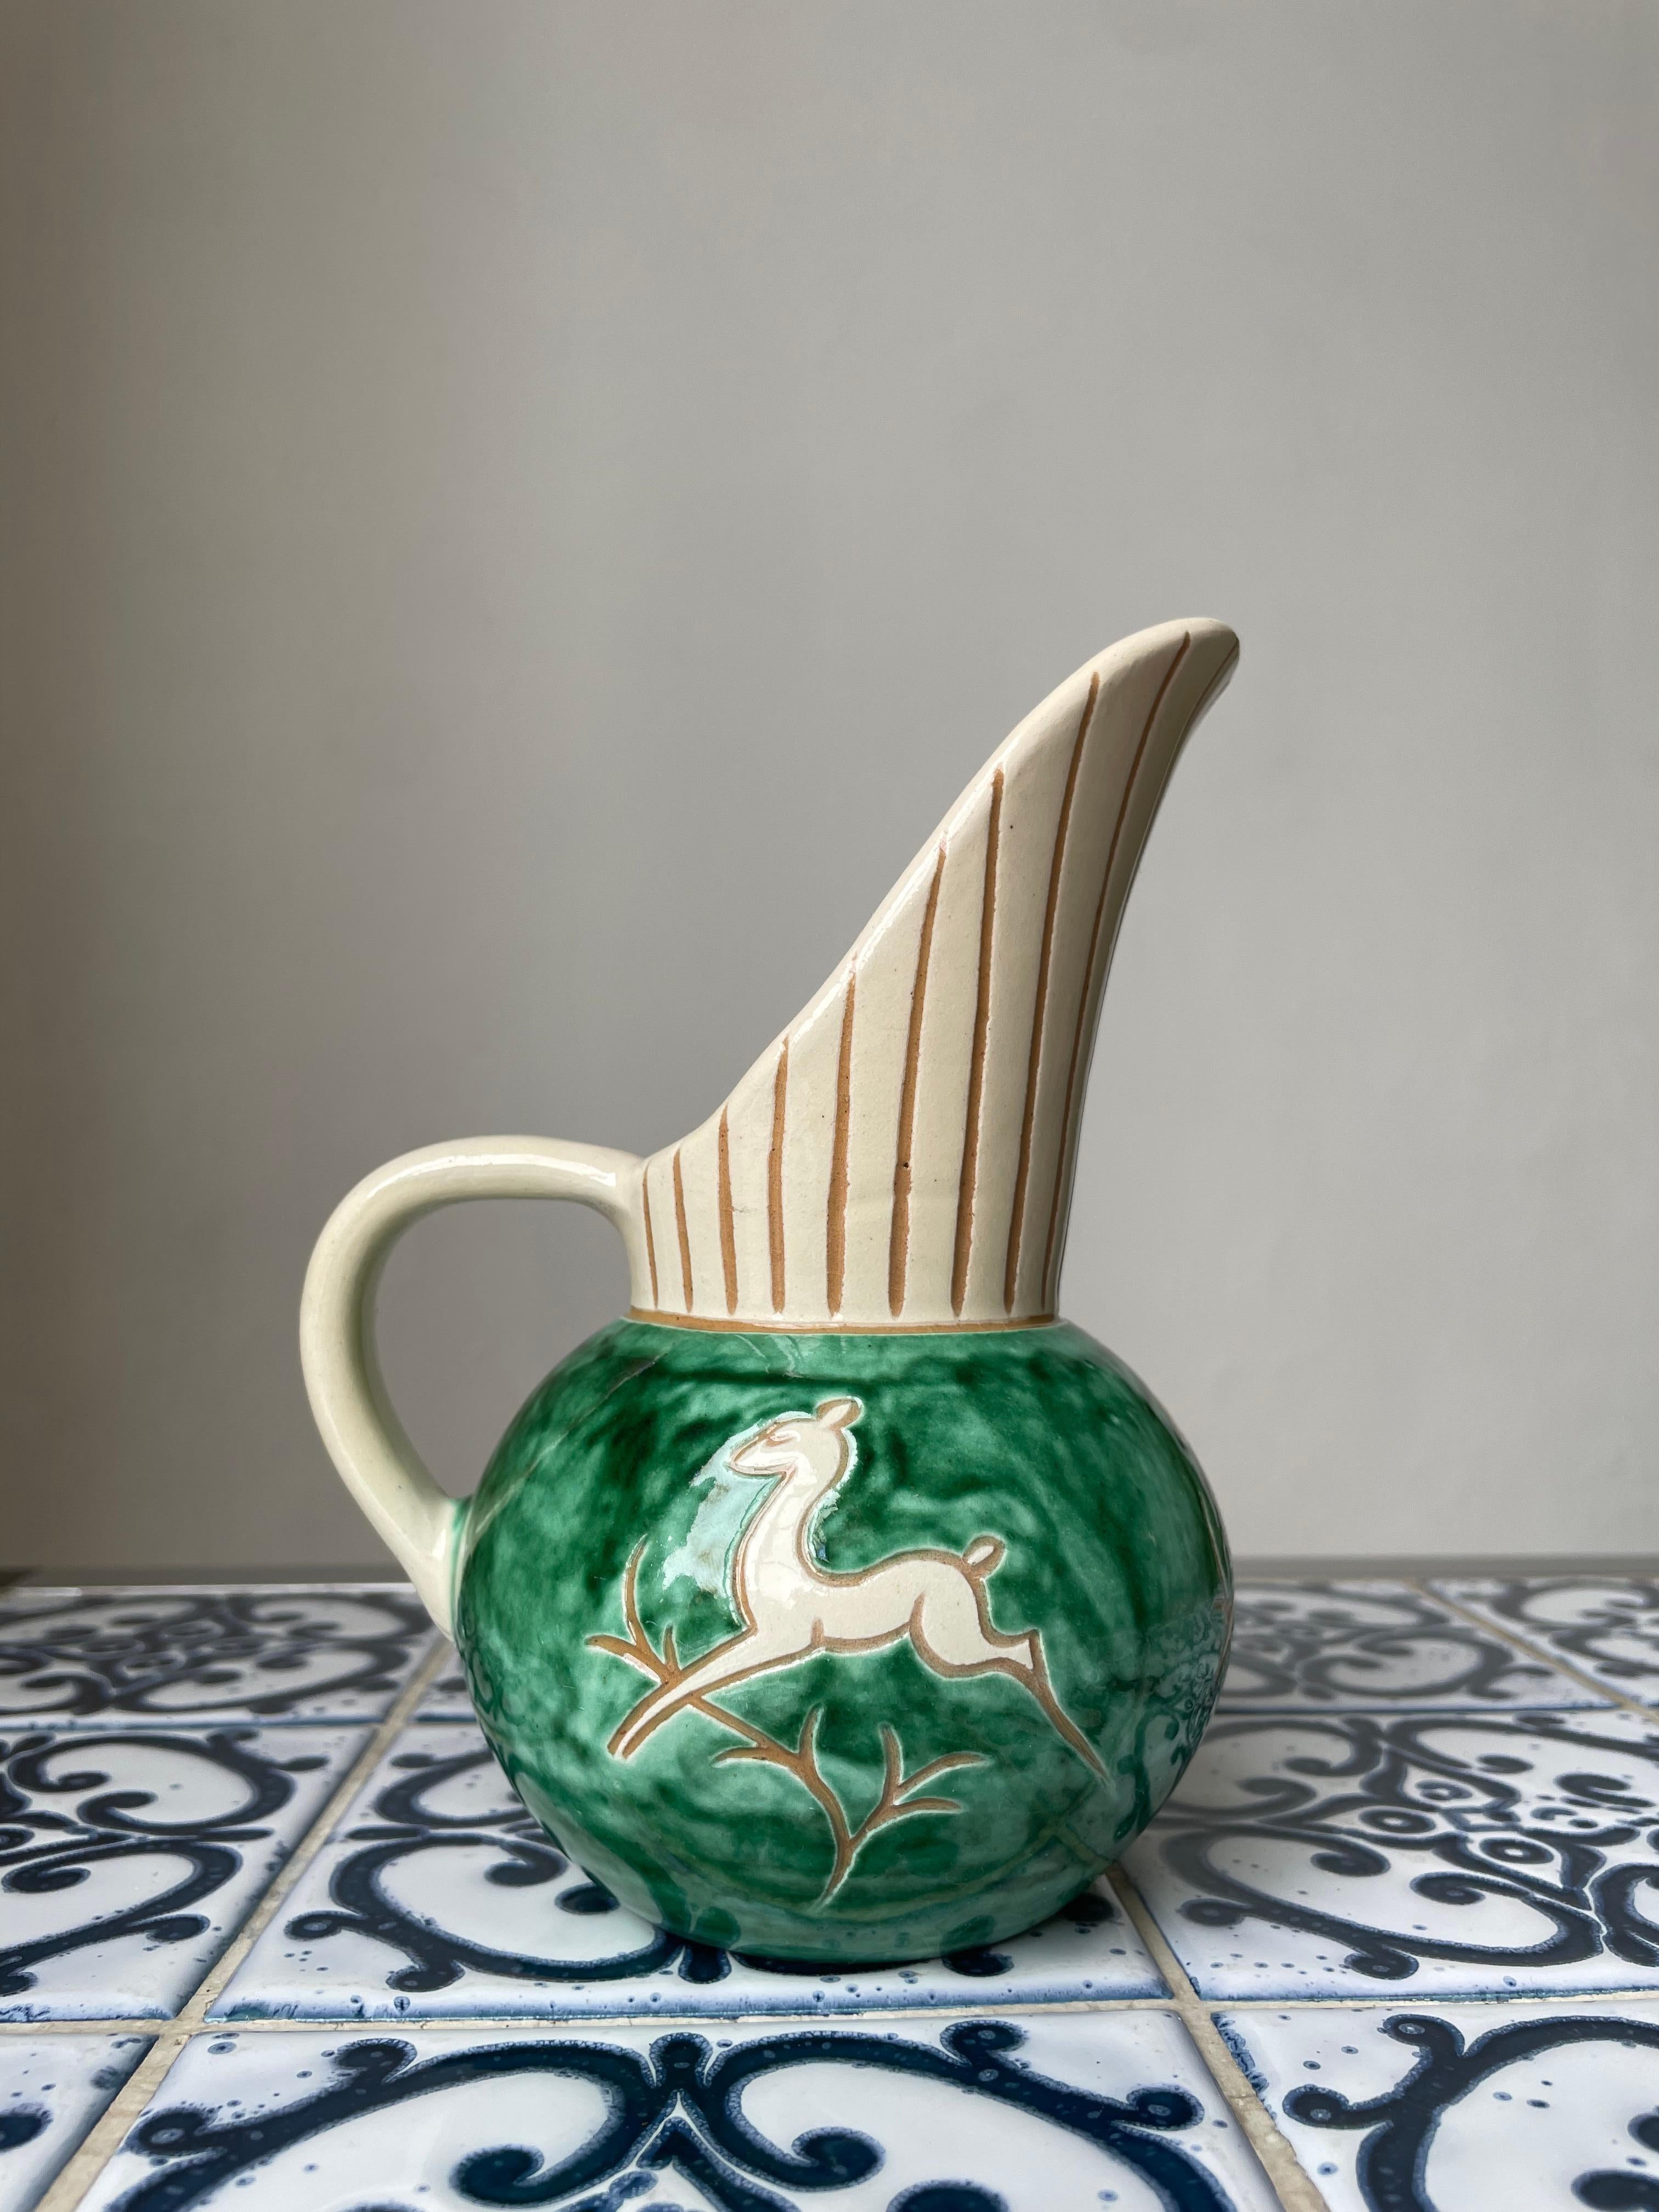 Handmade and hand-painted Danish midcentury modern ceramic pitcher vase from the 1950s. Incised lines on neck and organic jumping deer motifs on body. Green and cream colored glaze. Manufactured by Haunsø Ceramics.